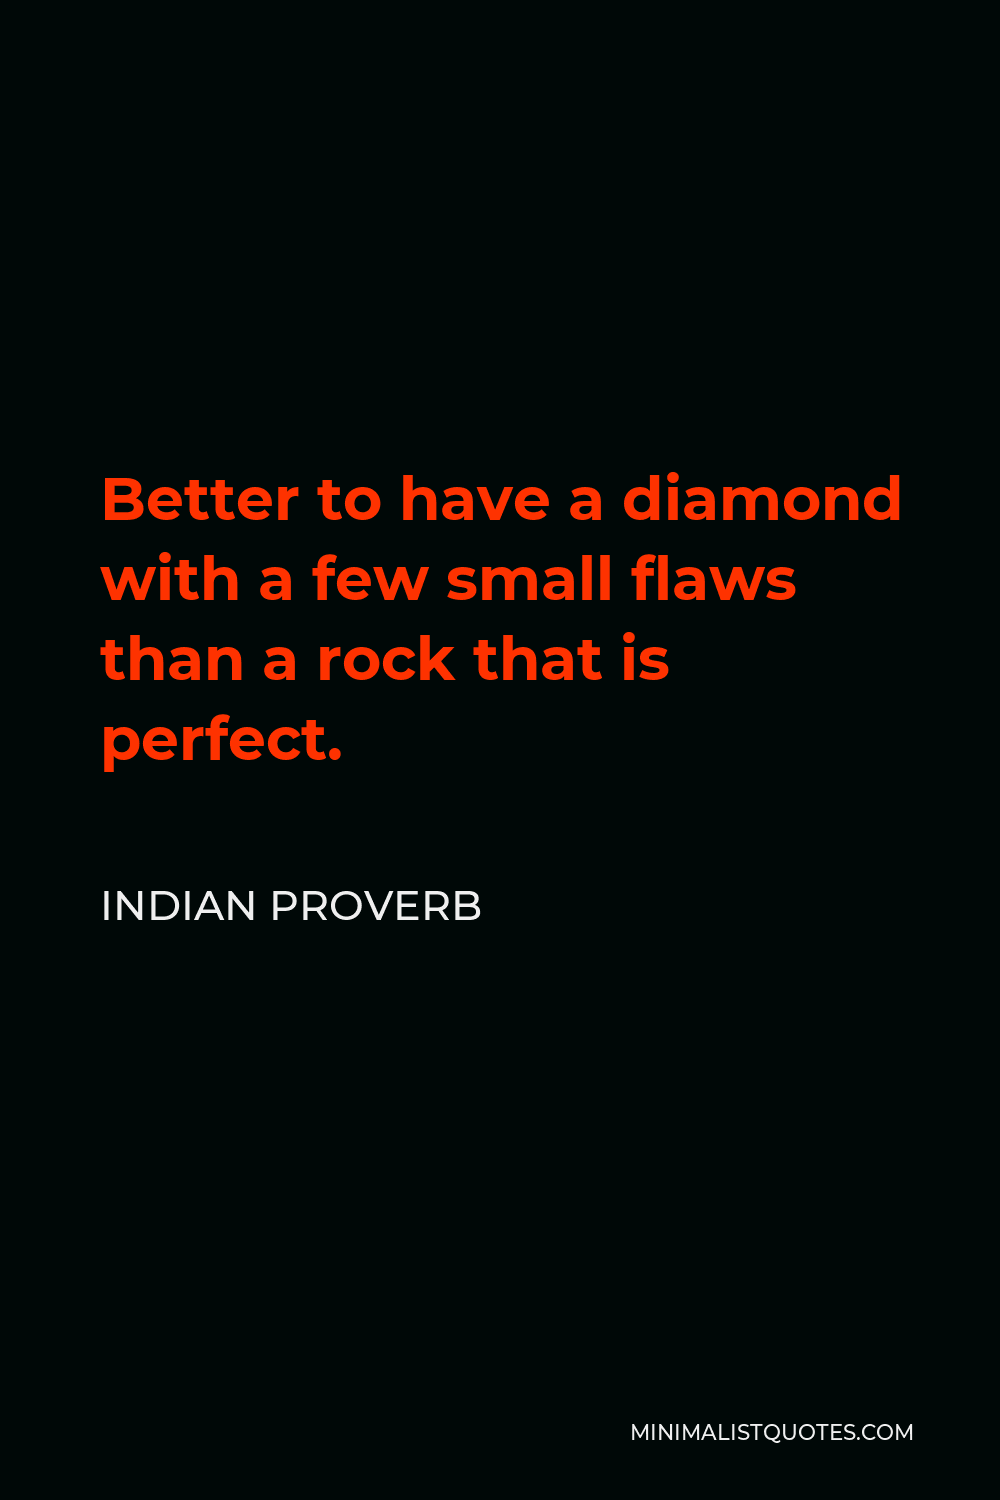 Indian Proverb Quote - Better to have a diamond with a few small flaws than a rock that is perfect.